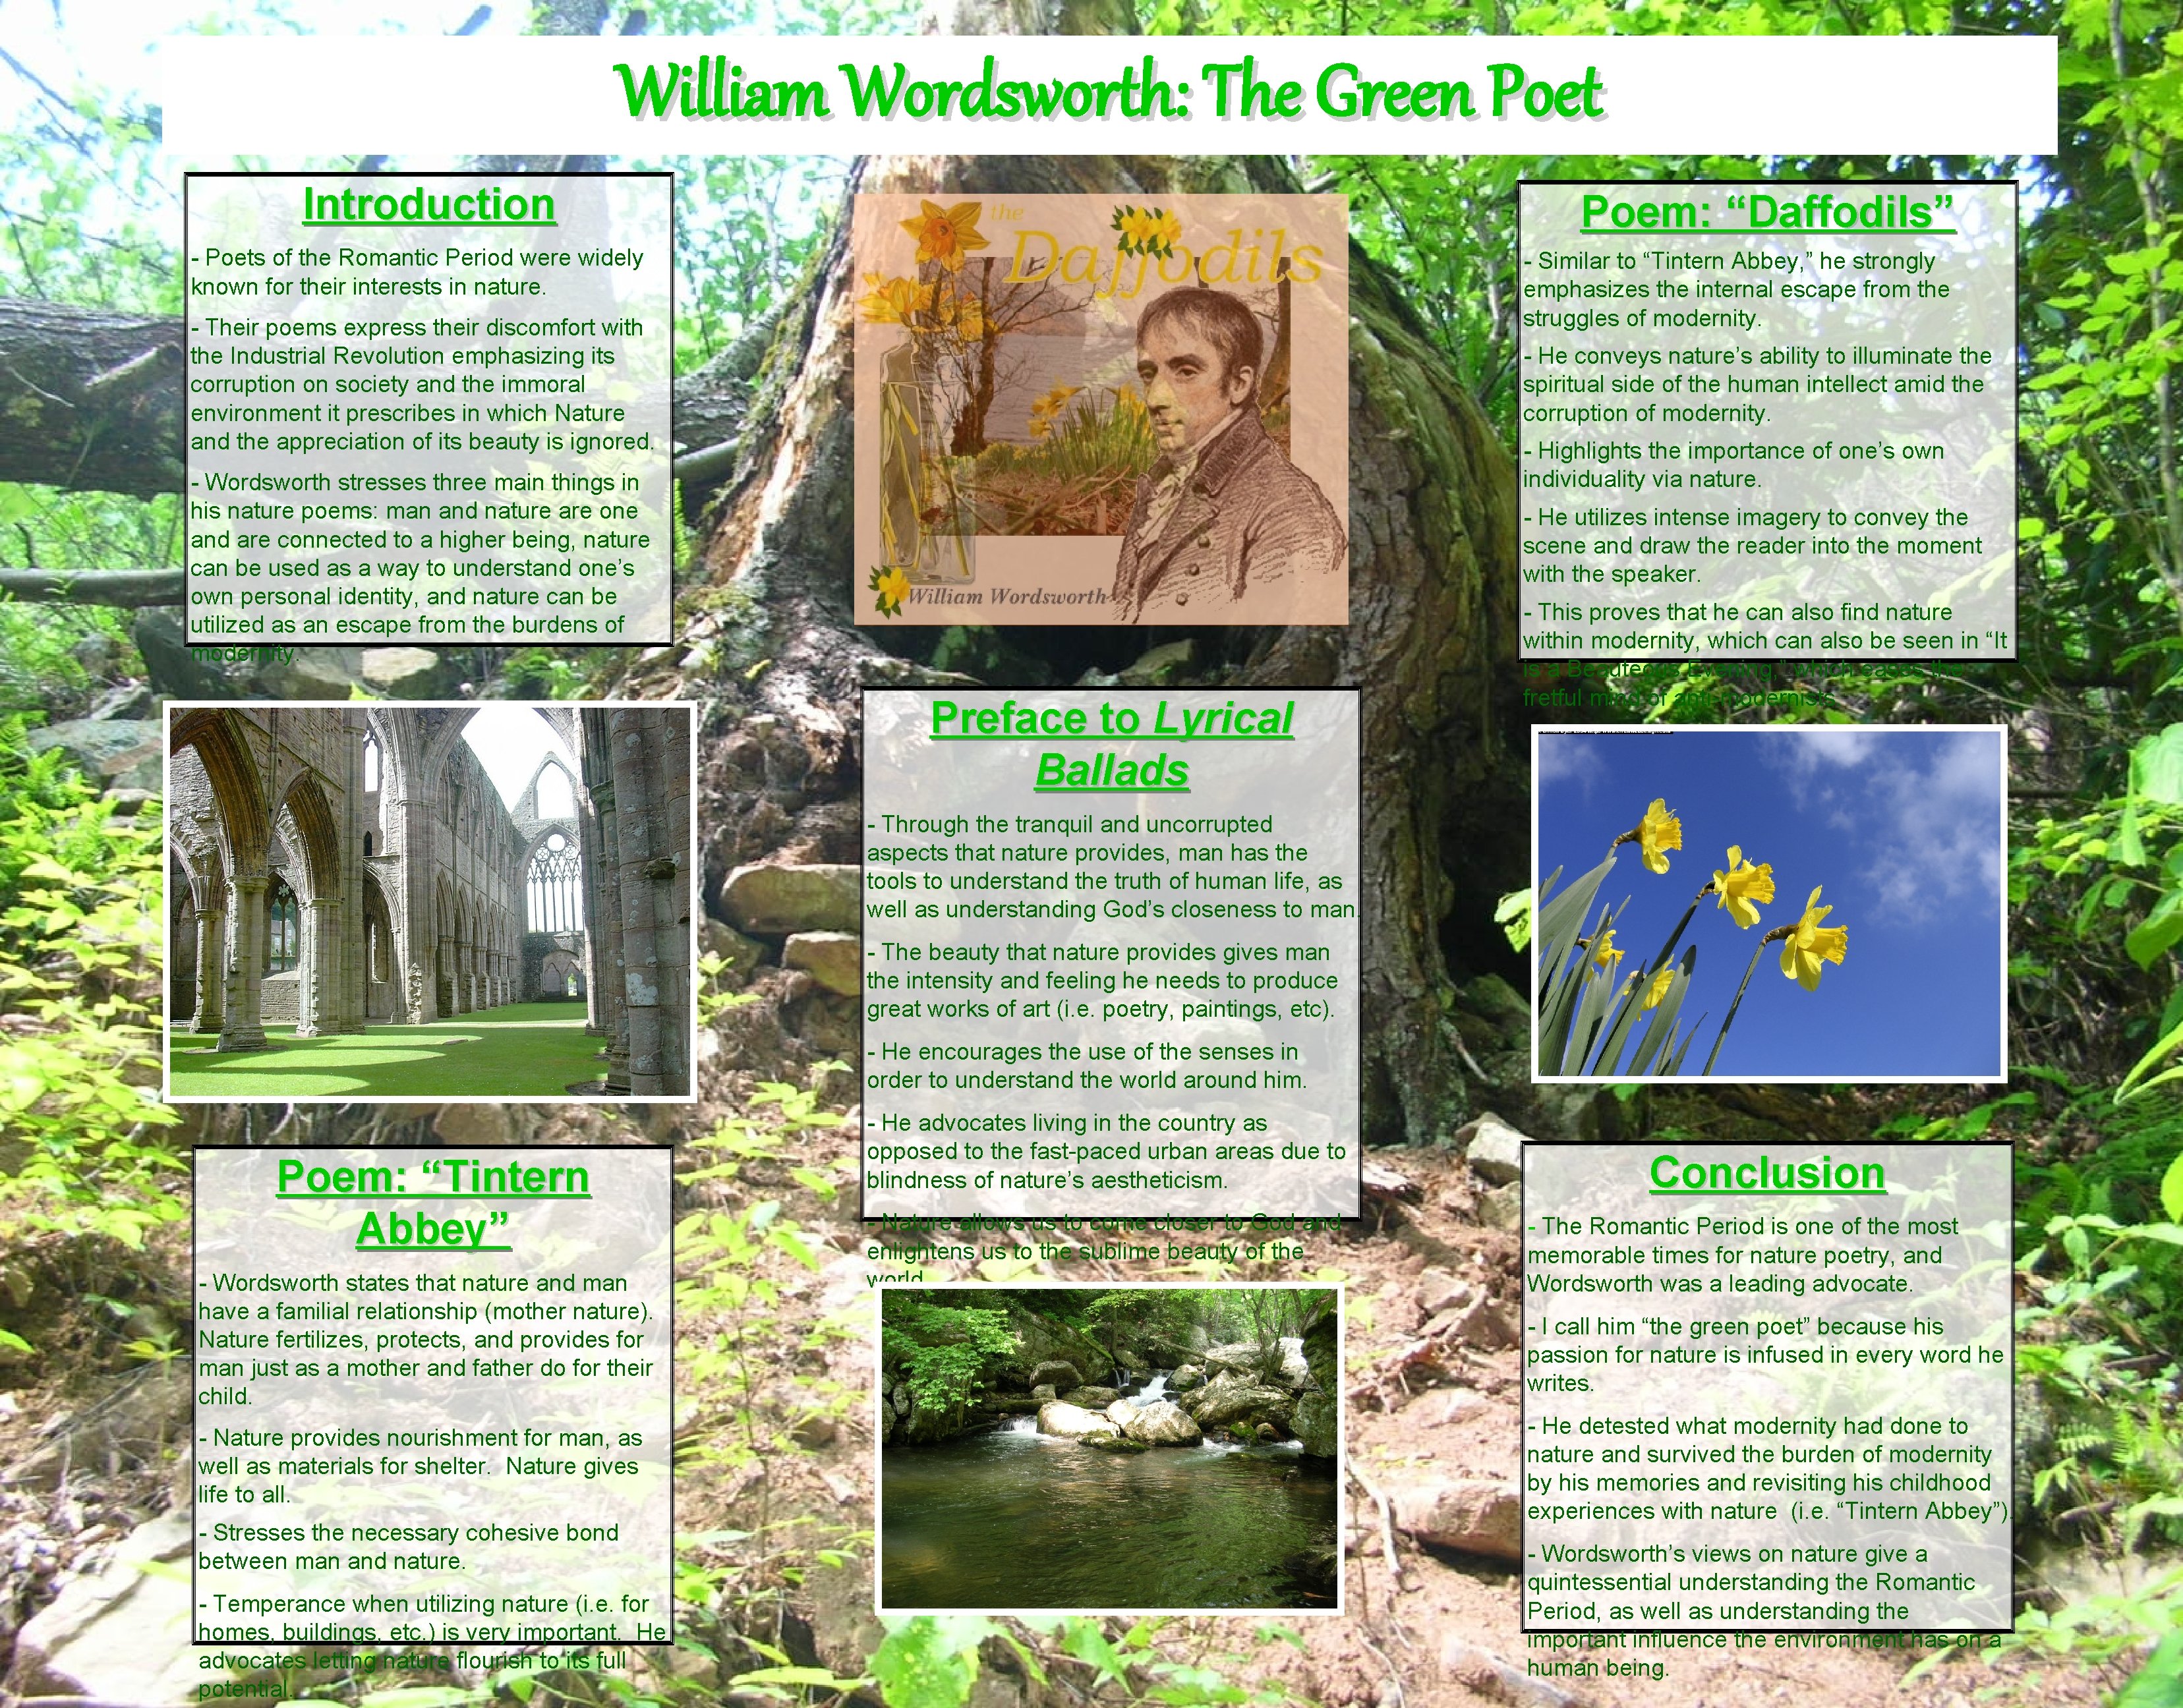 William Wordsworth: The Green Poet Introduction Poem: “Daffodils” - Poets of the Romantic Period